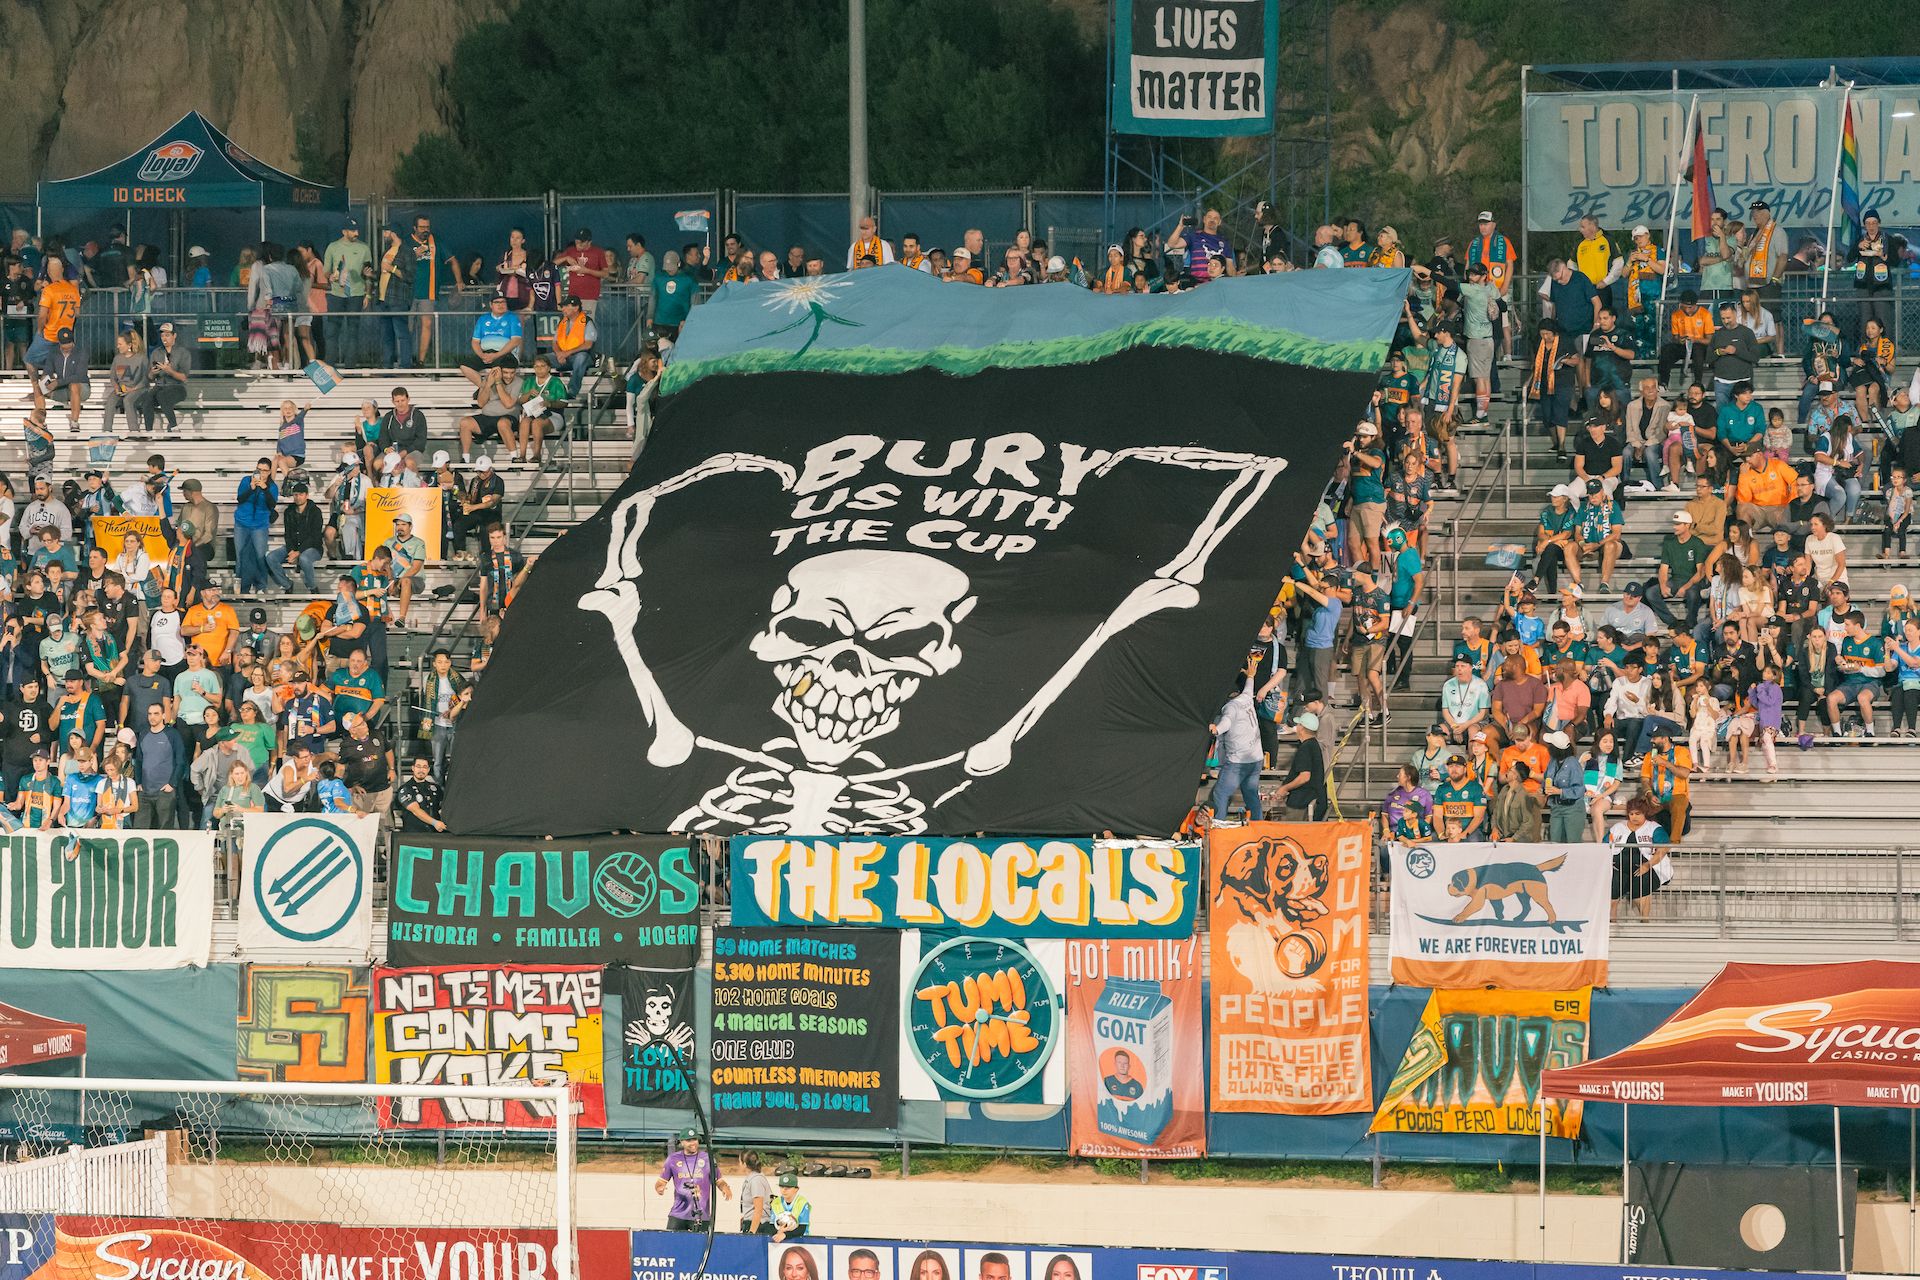 Fans in a soccer stadium hold up a giant banner that reads "Bury us with the cup" with a skeleton. 